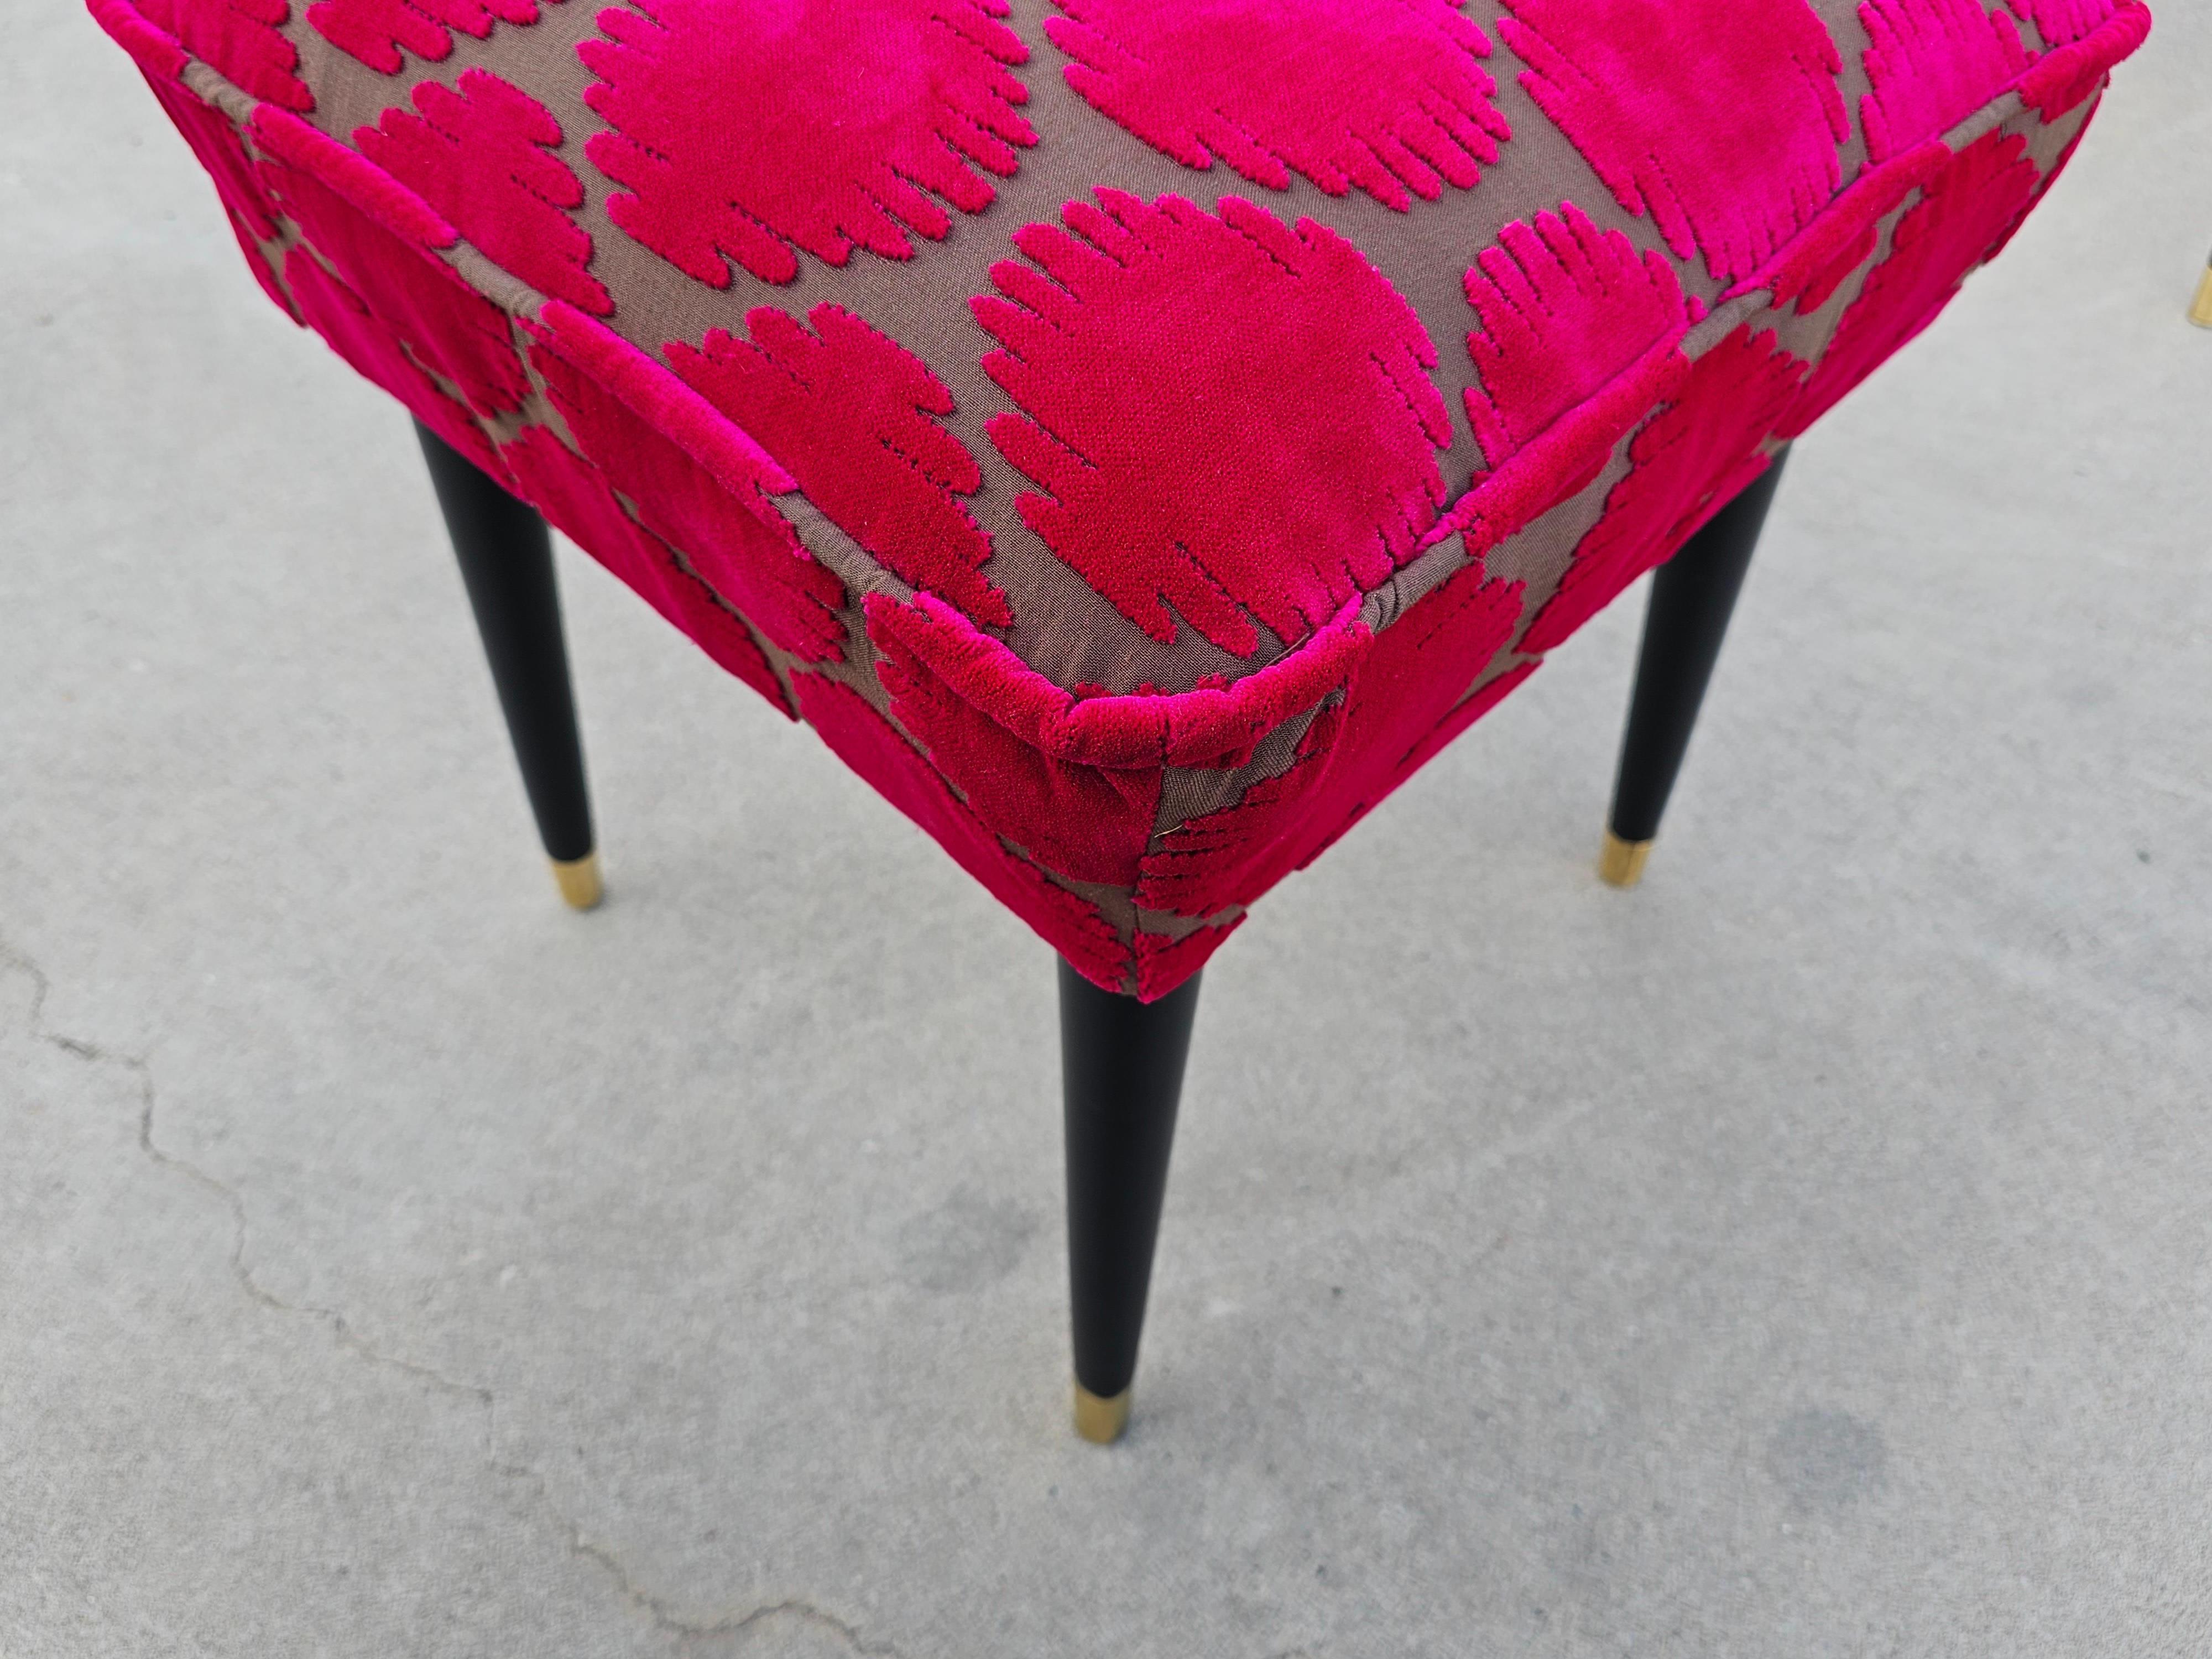 In this listing you will find two Mid-Century Modern Ottomans or Stools. The stools are fully refurbished and reupholstered in fuchsia polka dot velvet, inspired by the work of the Japanese artist Yayoi Kusama. The fibrant fabric is a true eye candy